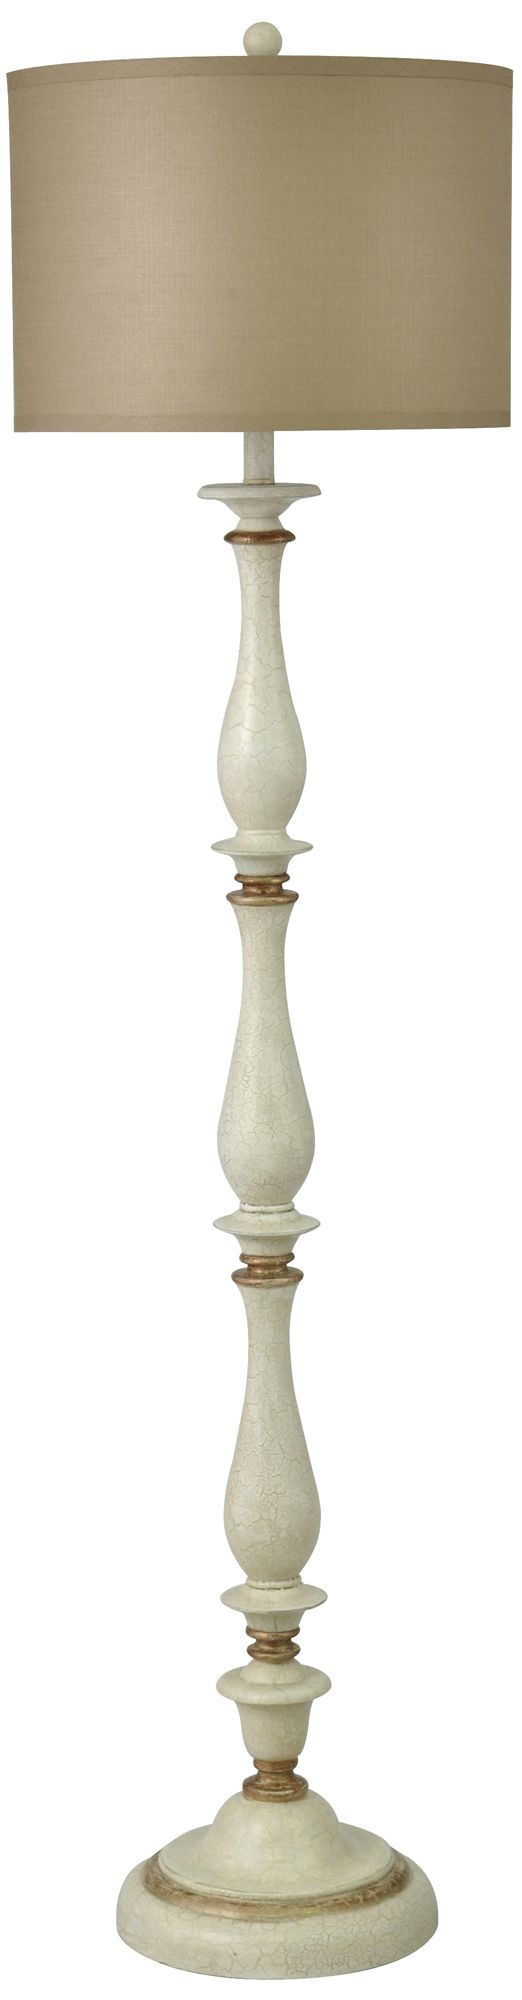 Charlton Floor Lamp - Crackled White and Gold Finish - Taupe Silk Shade